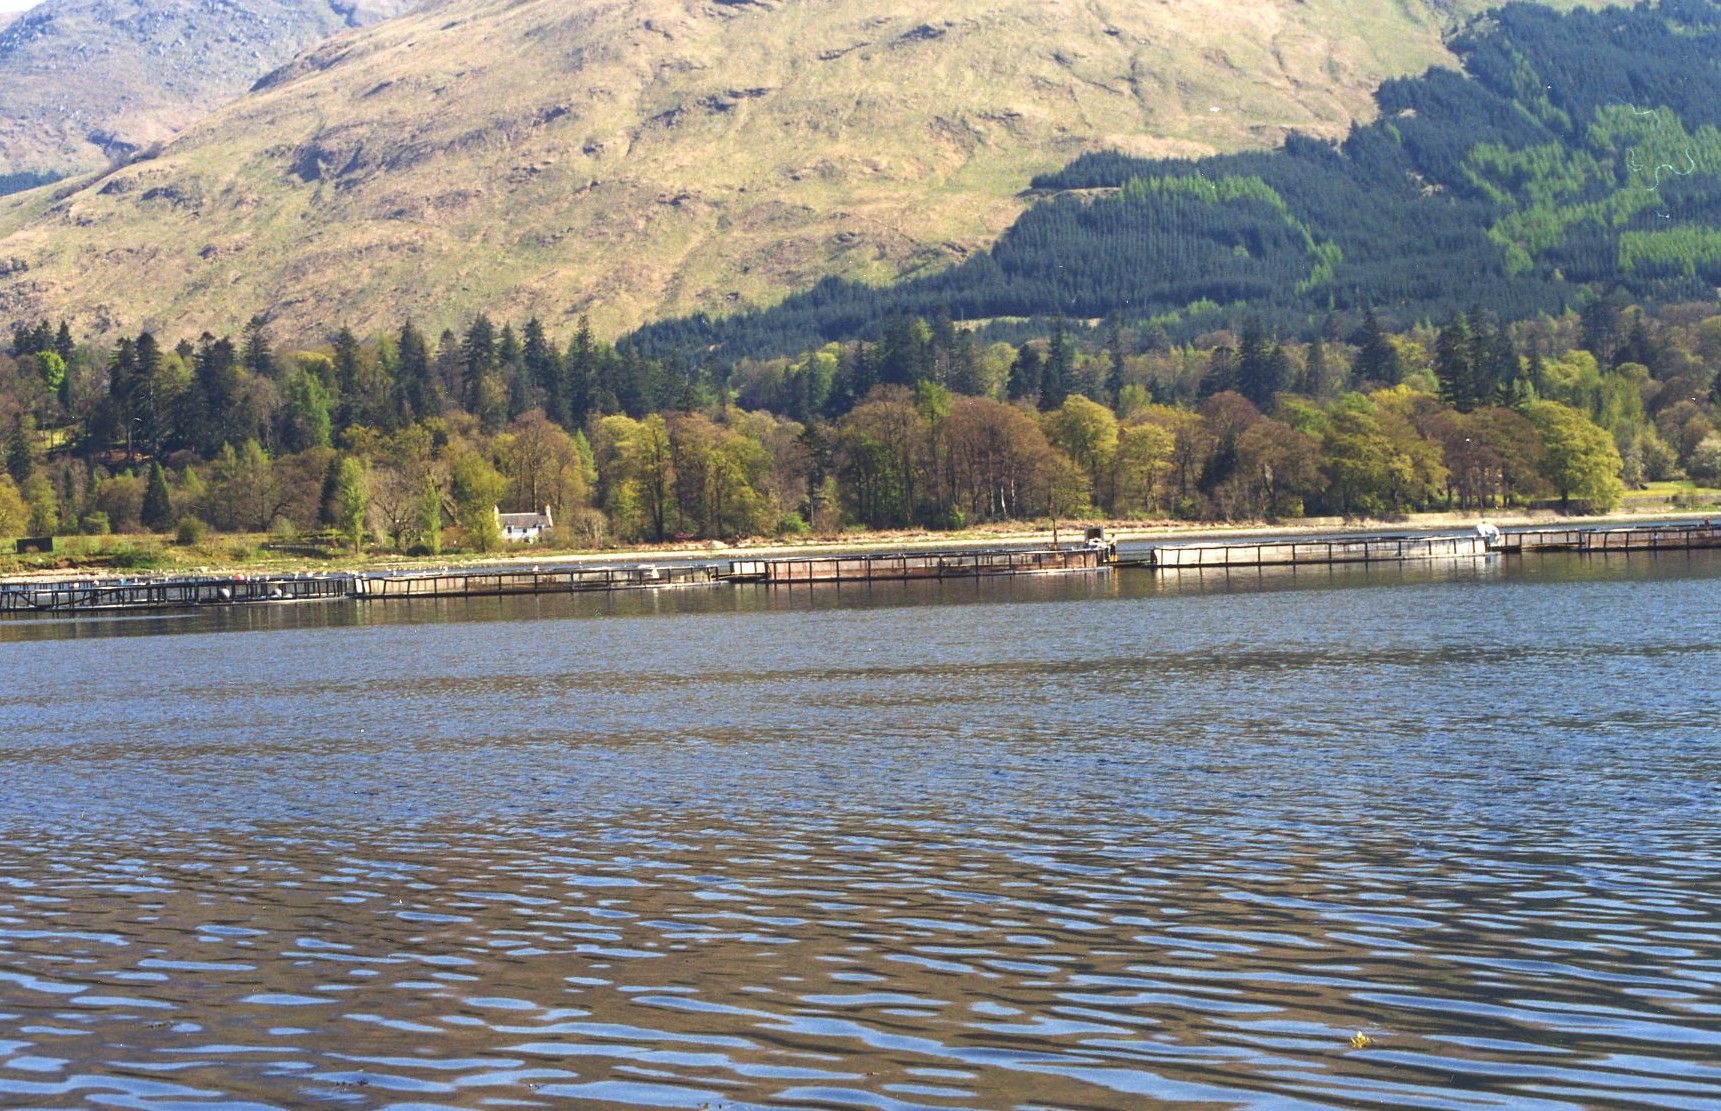 Cages on Loch Fyne